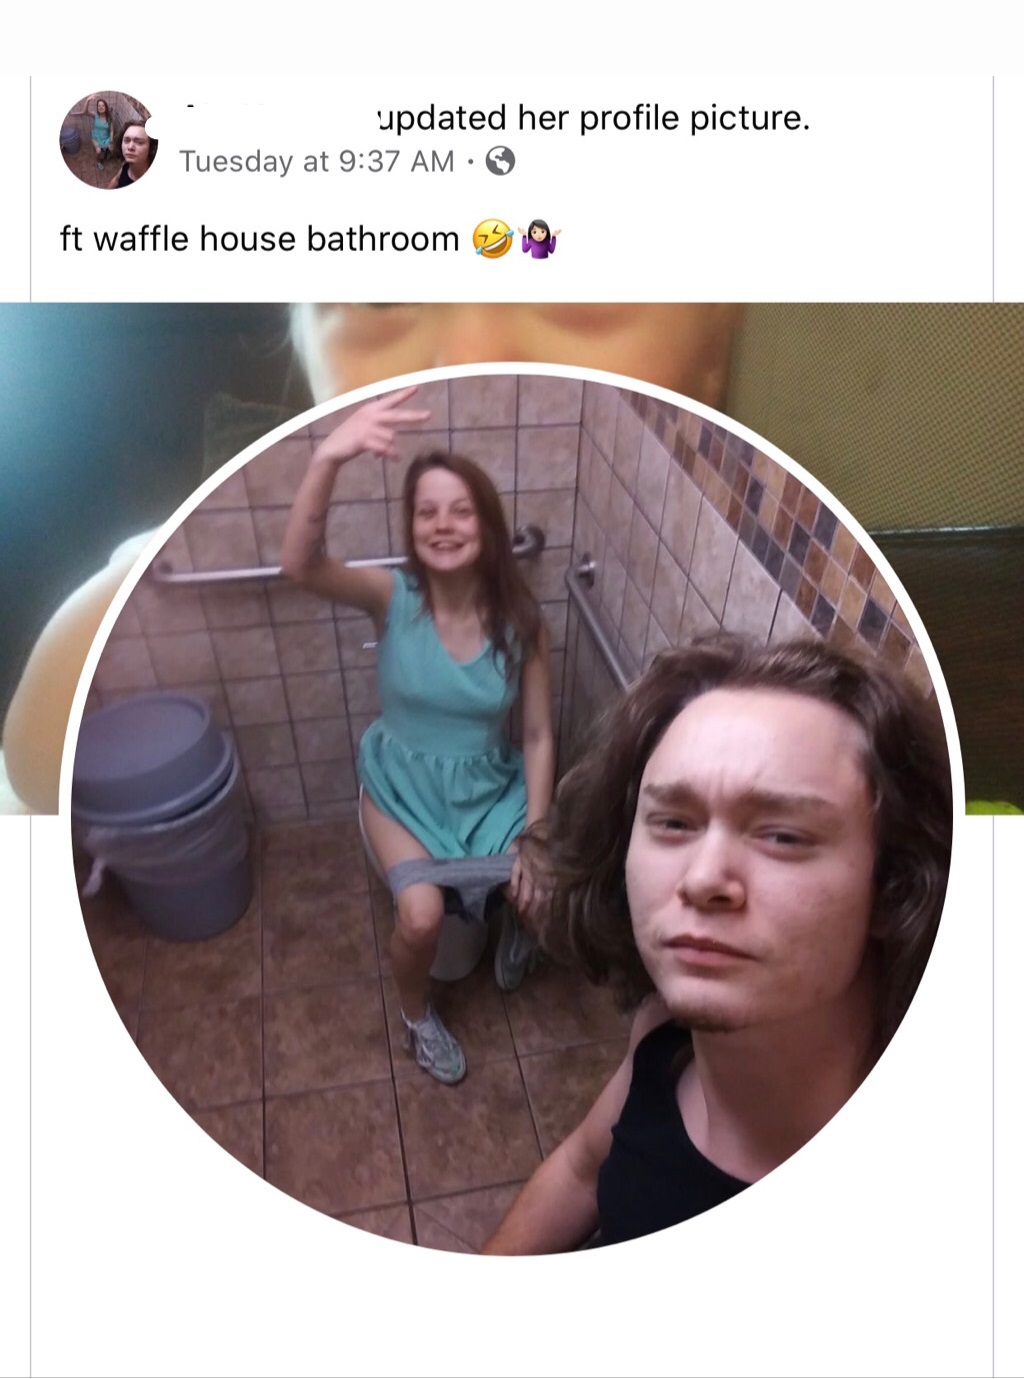 photo caption - updated her profile picture. Tuesday at ft waffle house bathroom Sune